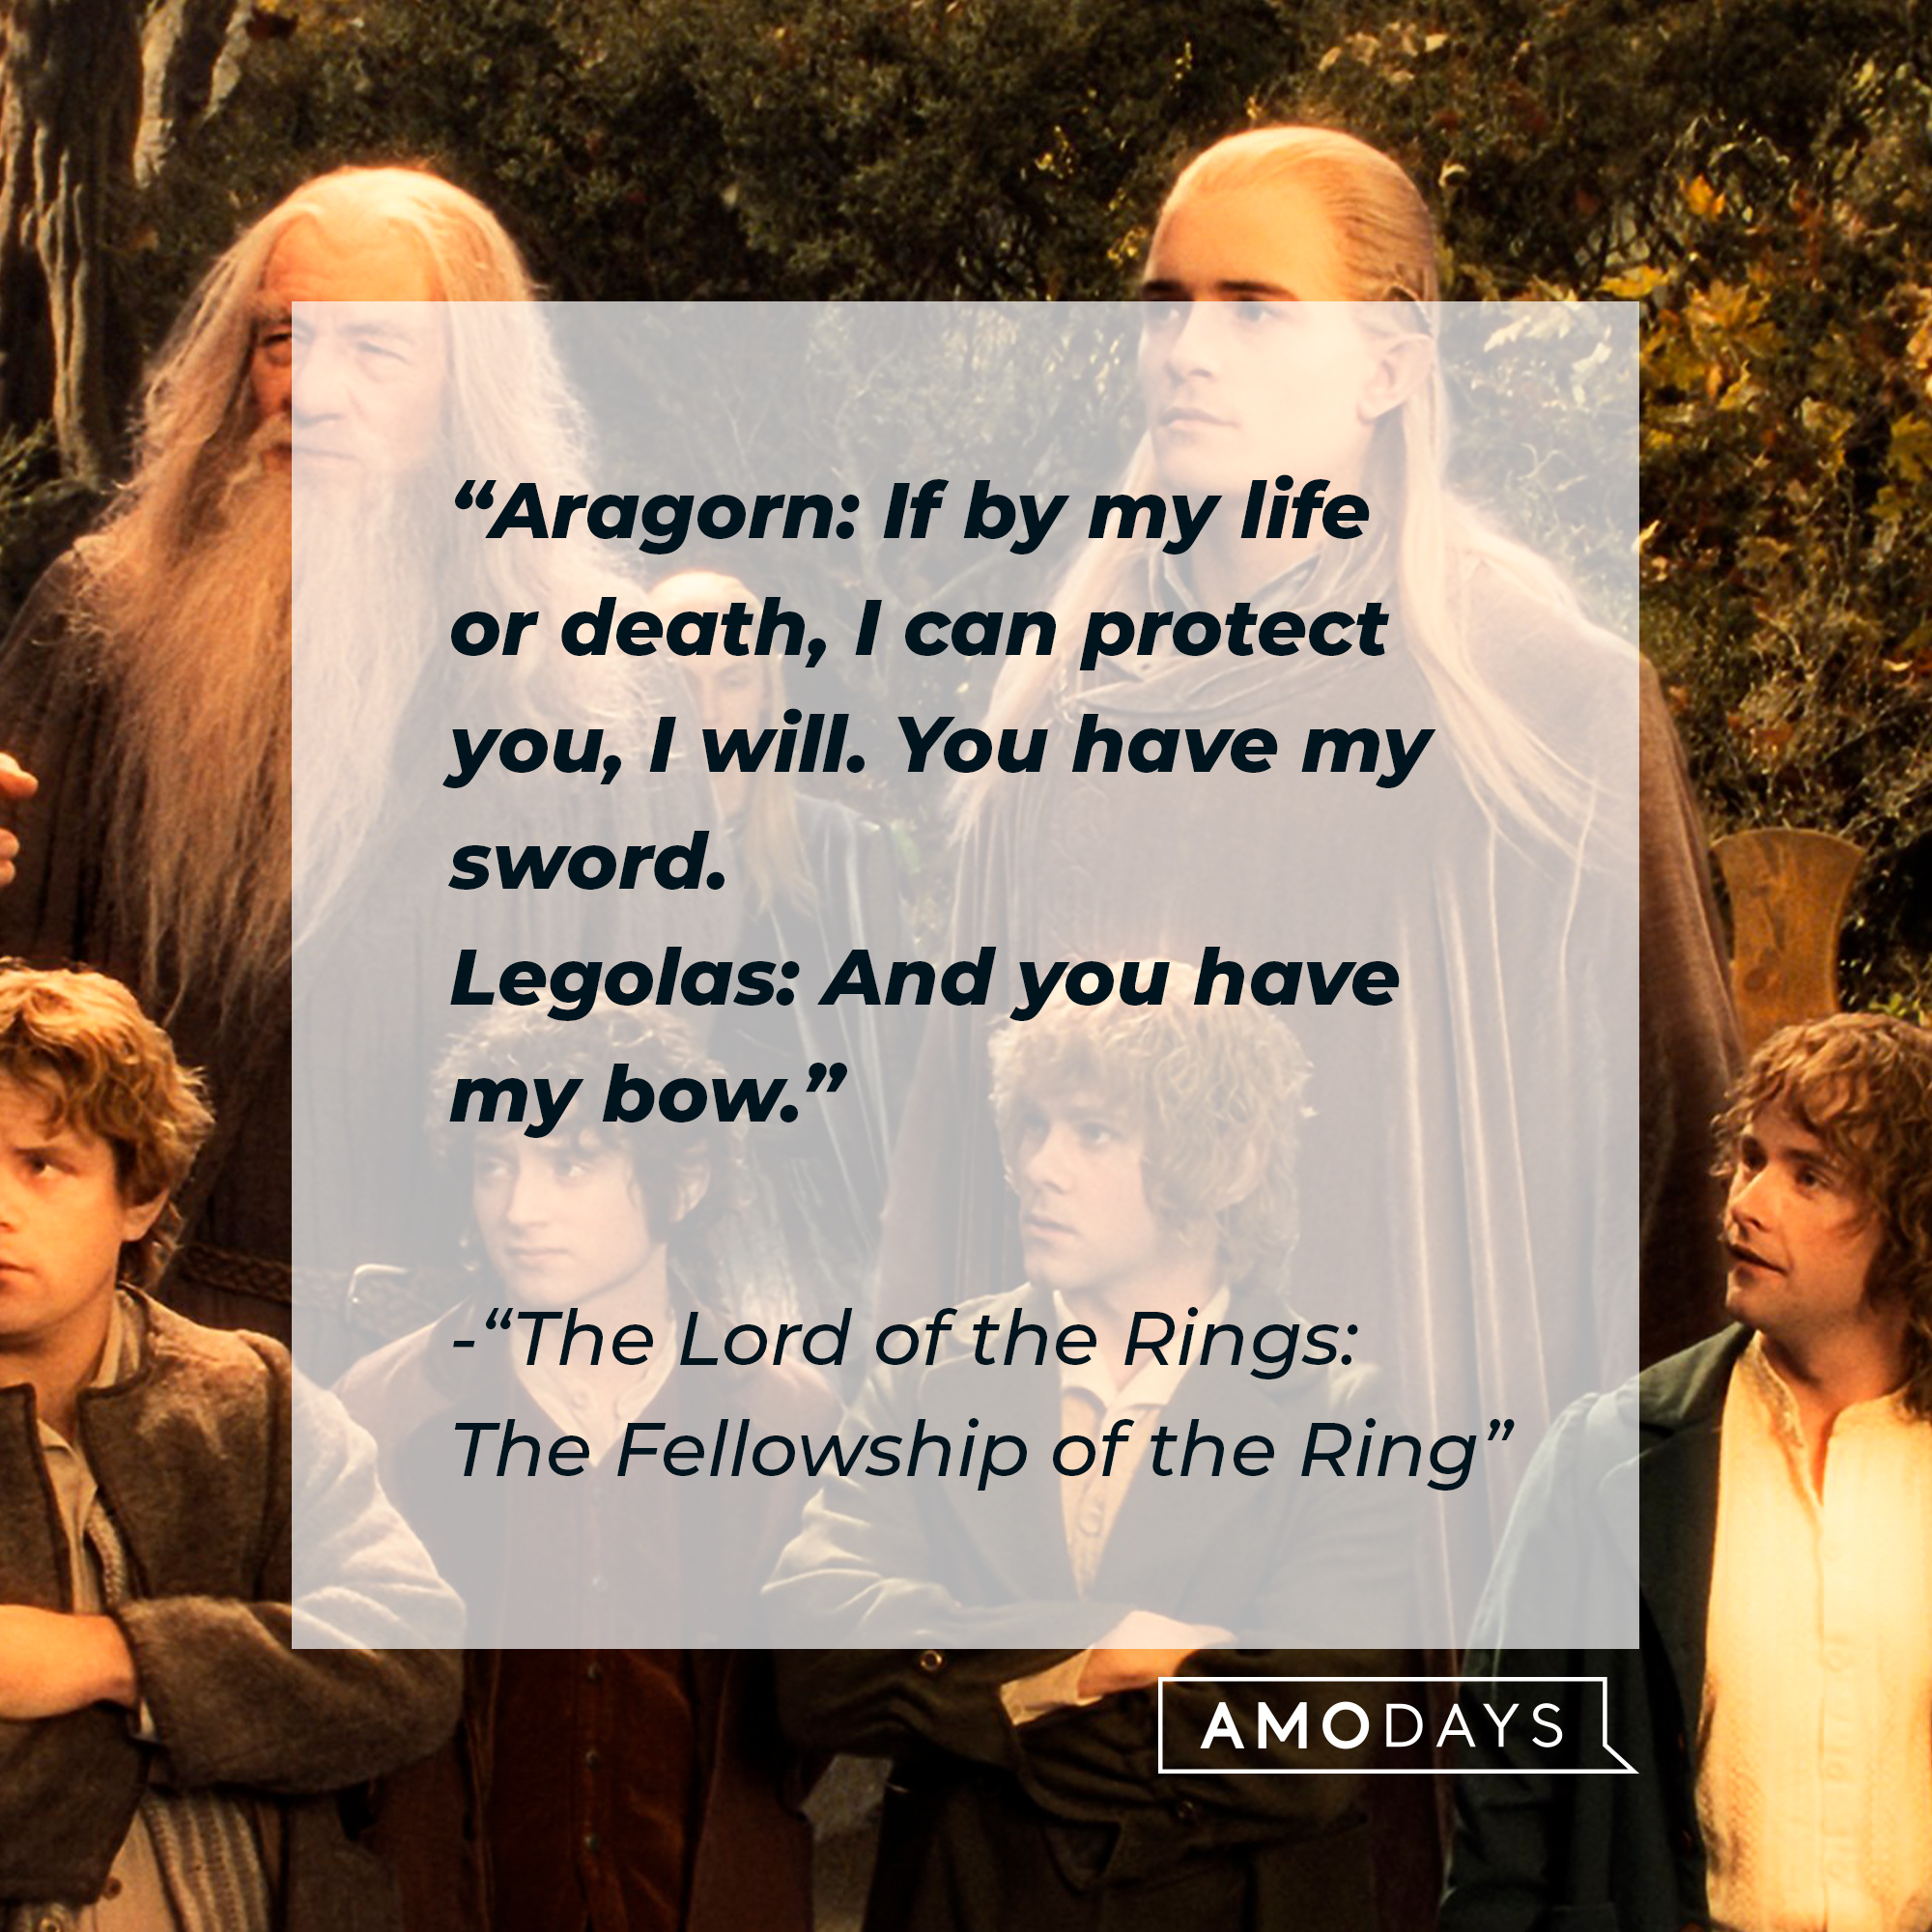 Legolas with his quote: "Aragorn: If by my life or death, I can protect you, I will. You have my sword. ; Legolas: And you have my bow."  | Source: Facebook.com/lordoftheringstrilogy